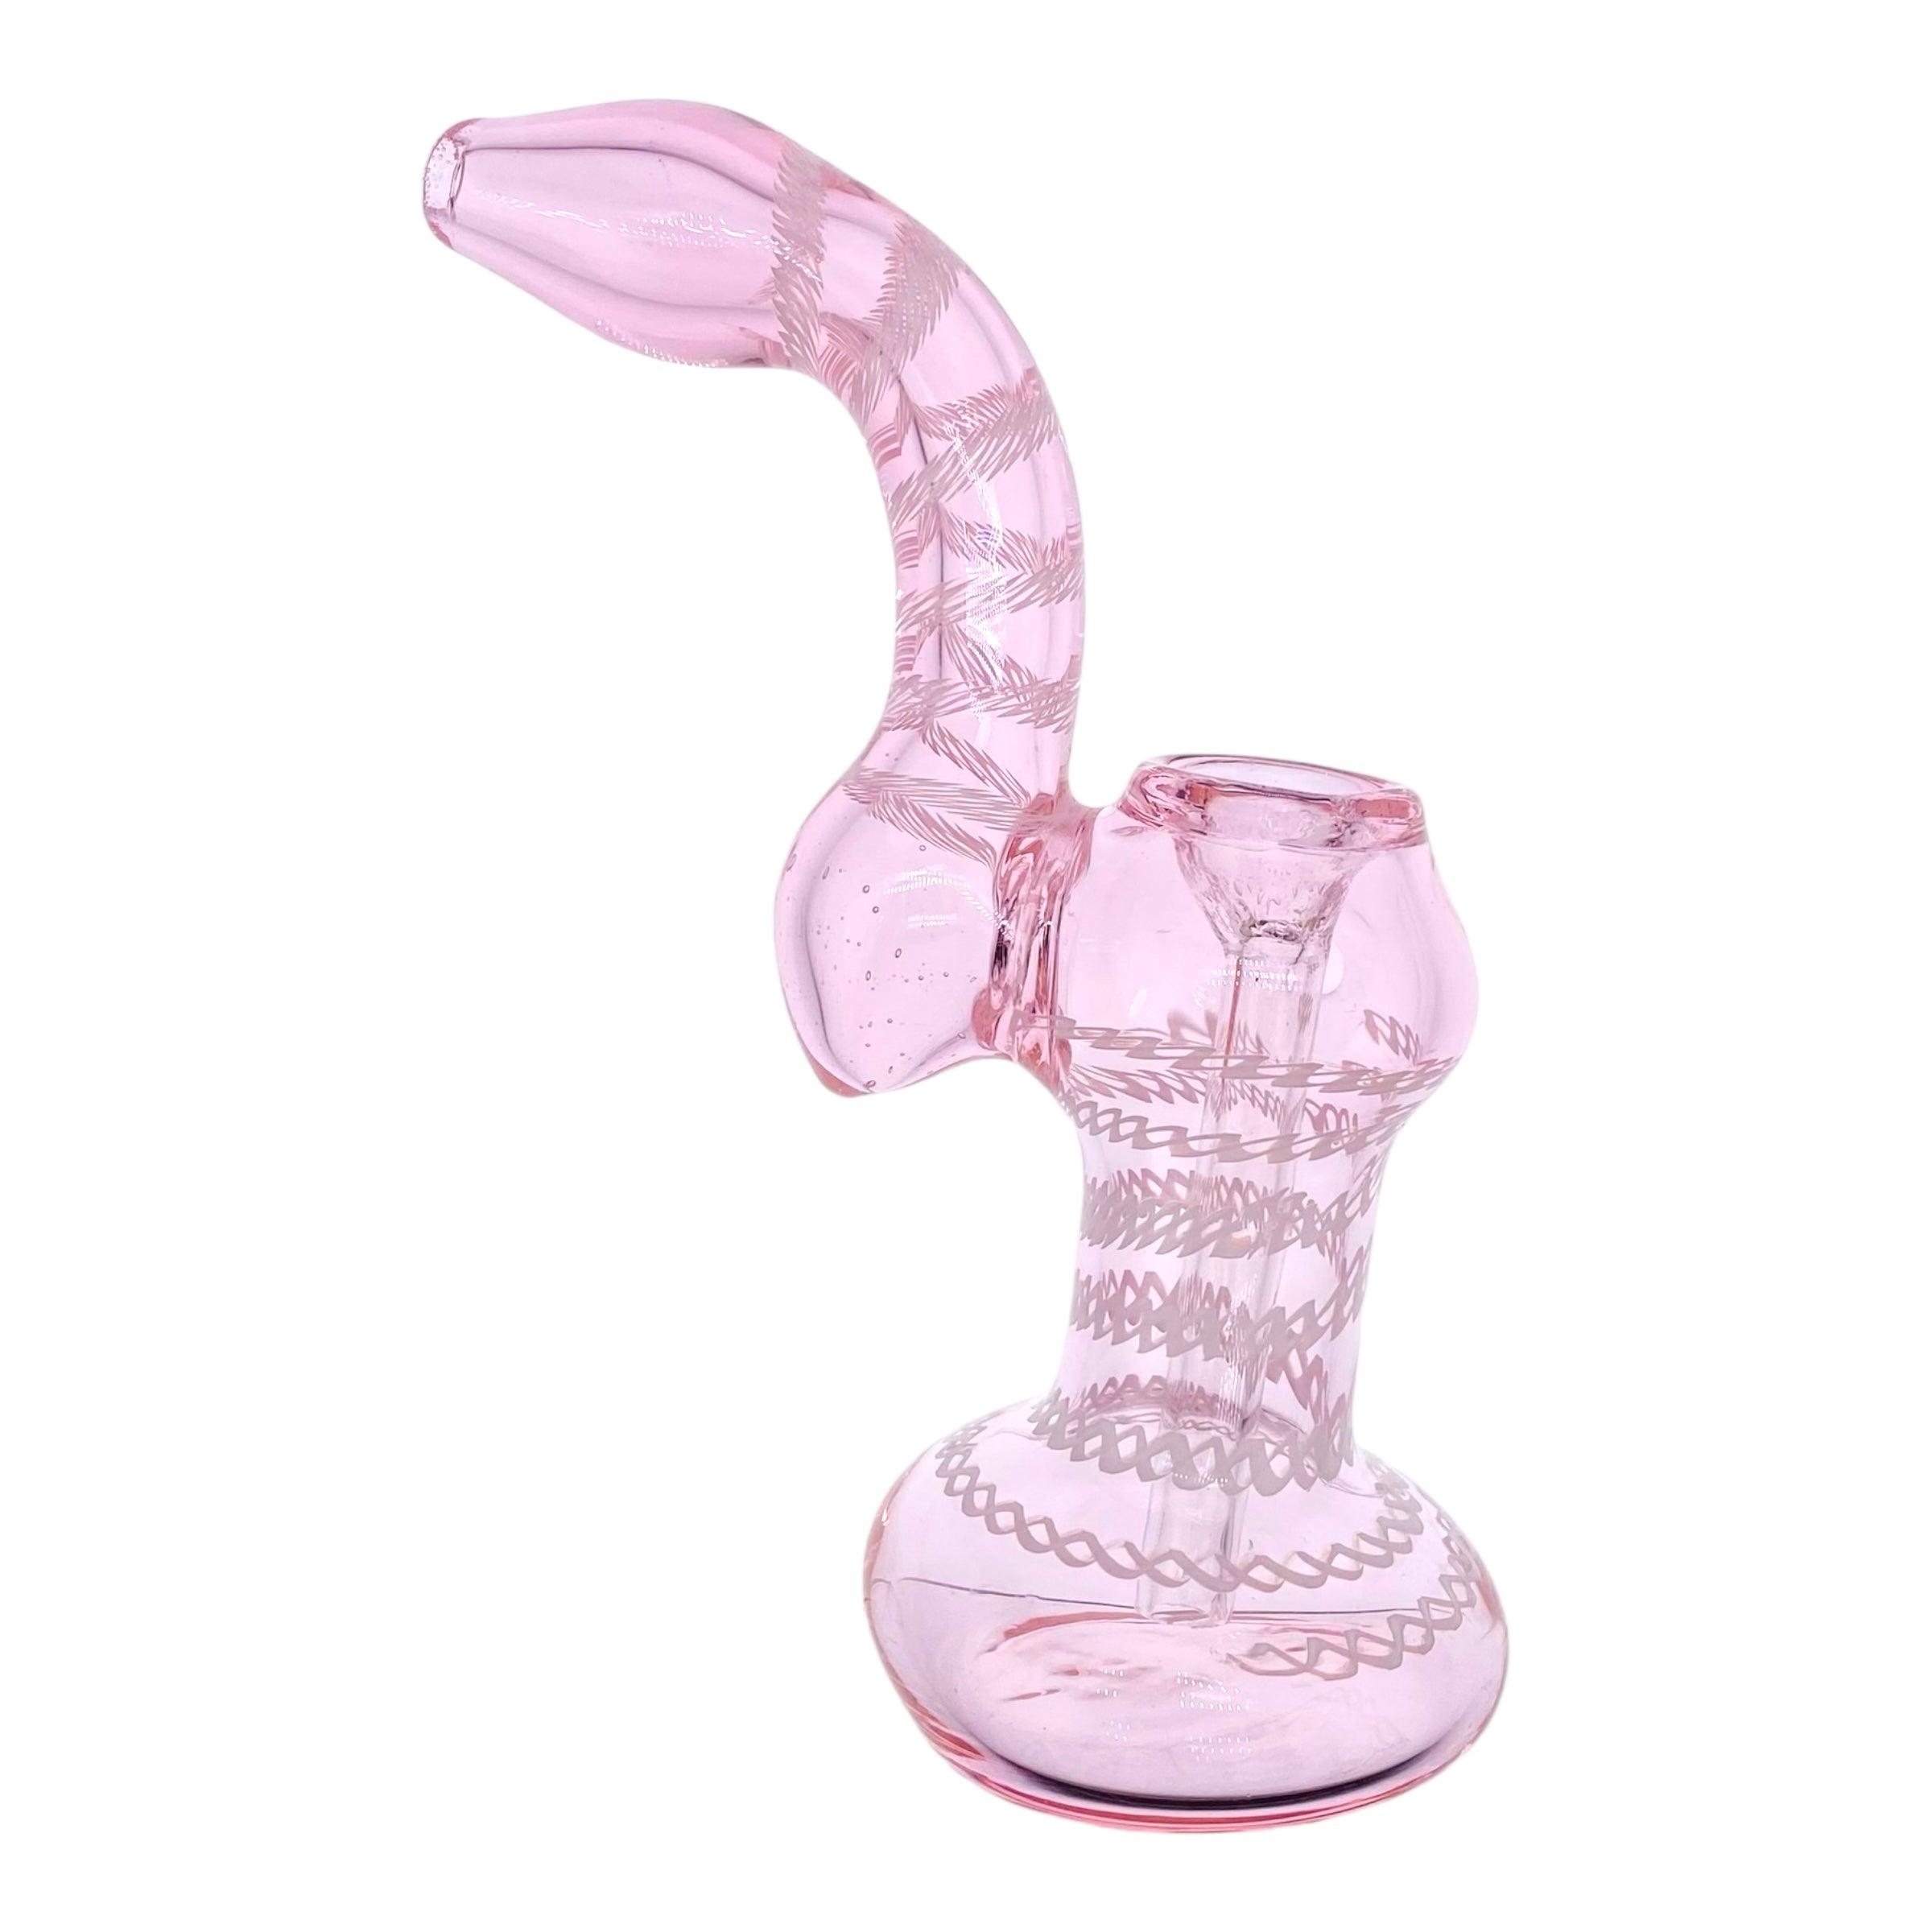 heady glass cute and girly Pink And White Linework Twist Stand Up Glass Bubbler for sale